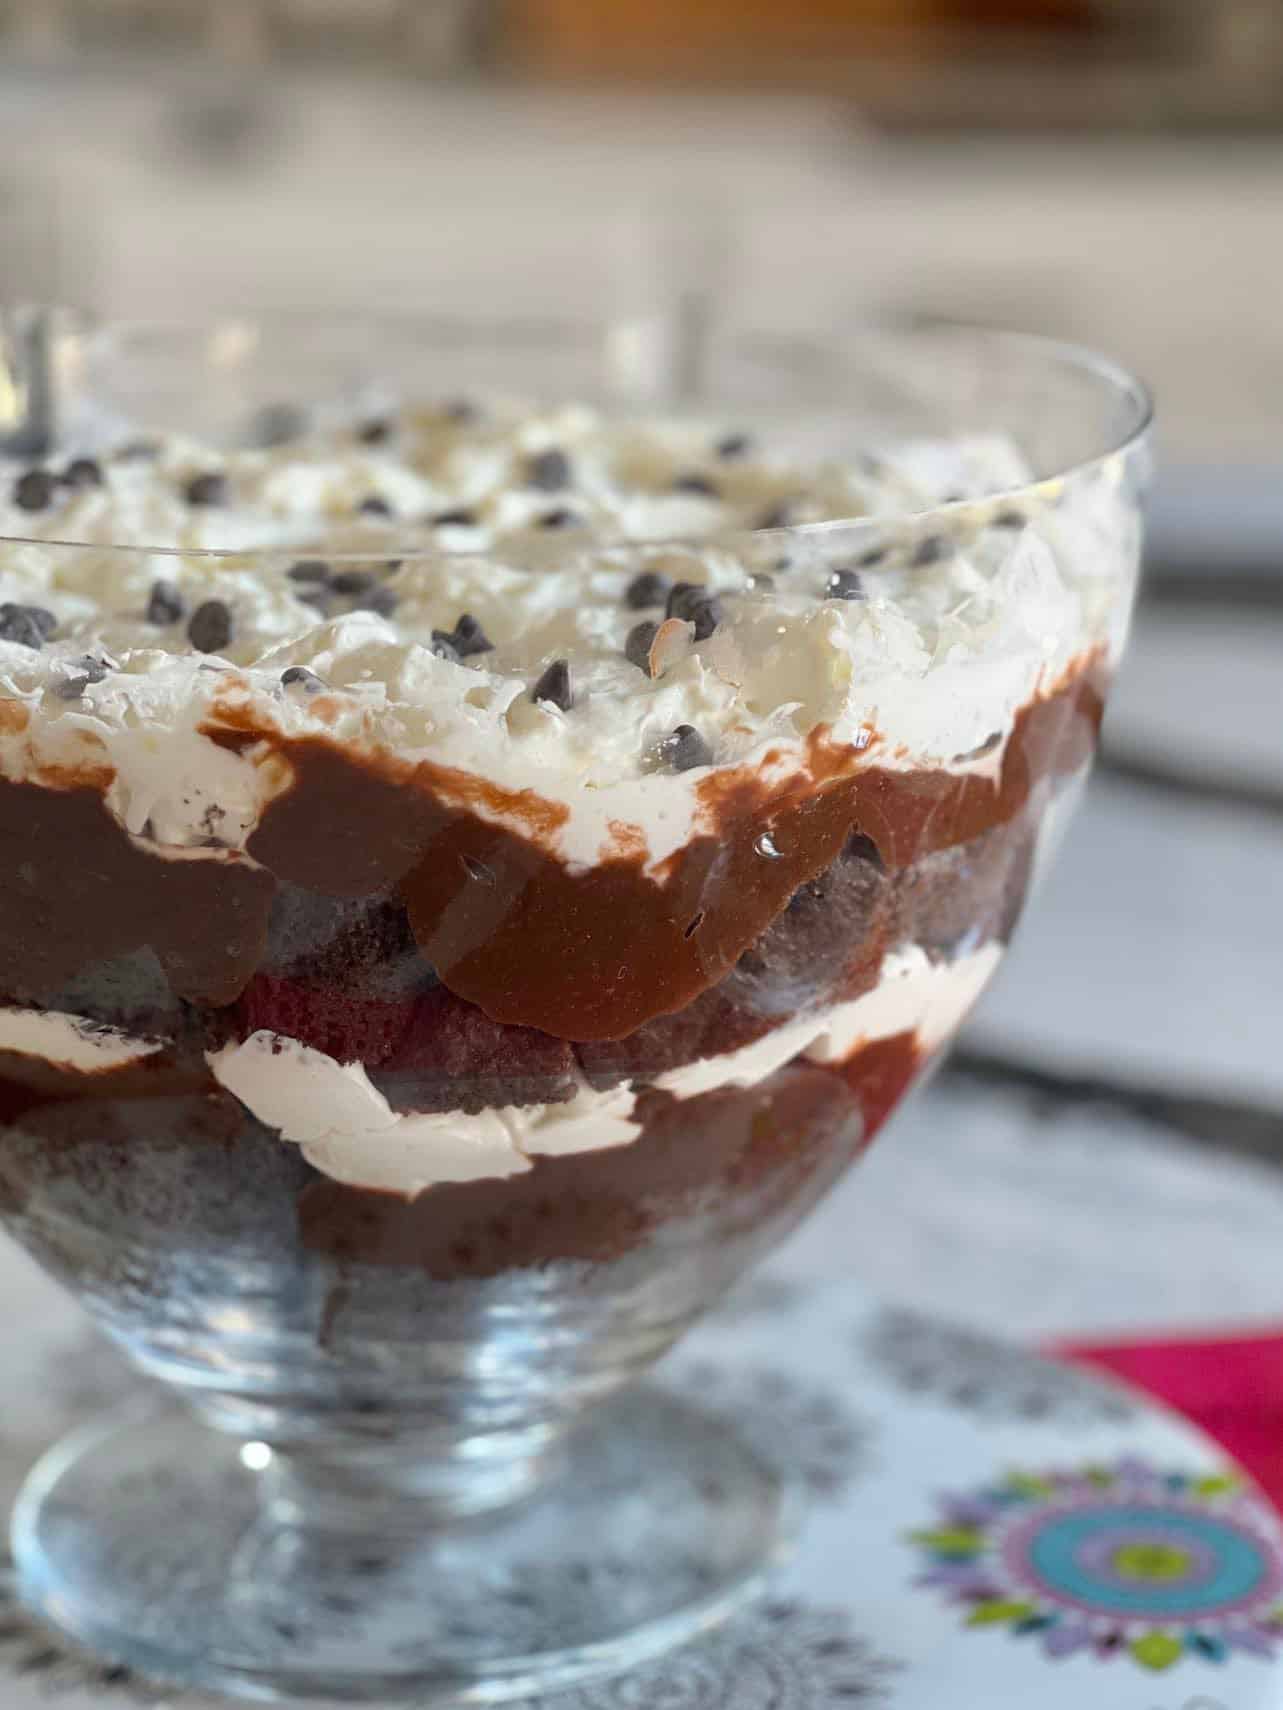 How to Make a Melt-in-Your-Mouth Chocolate Trifle